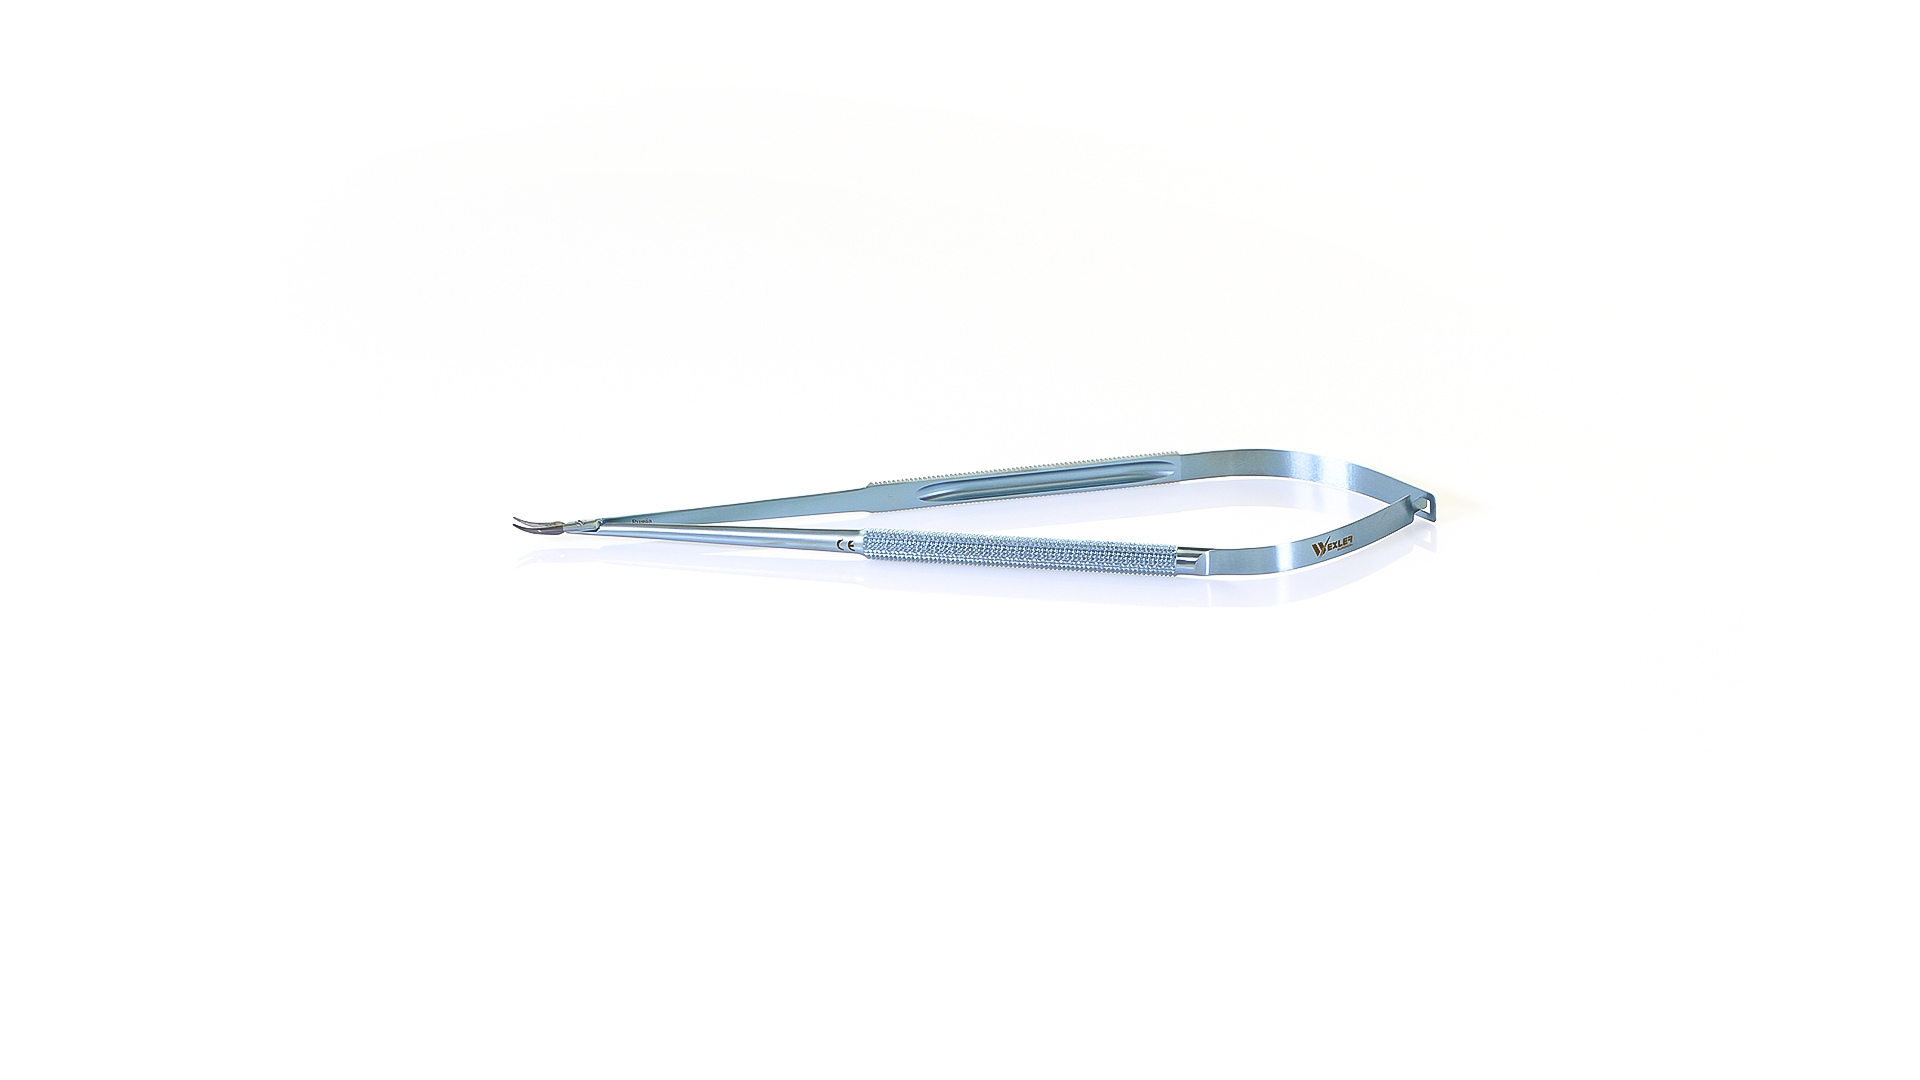 Barraquer Delicate Needle Holder - Curved TC coated jaws